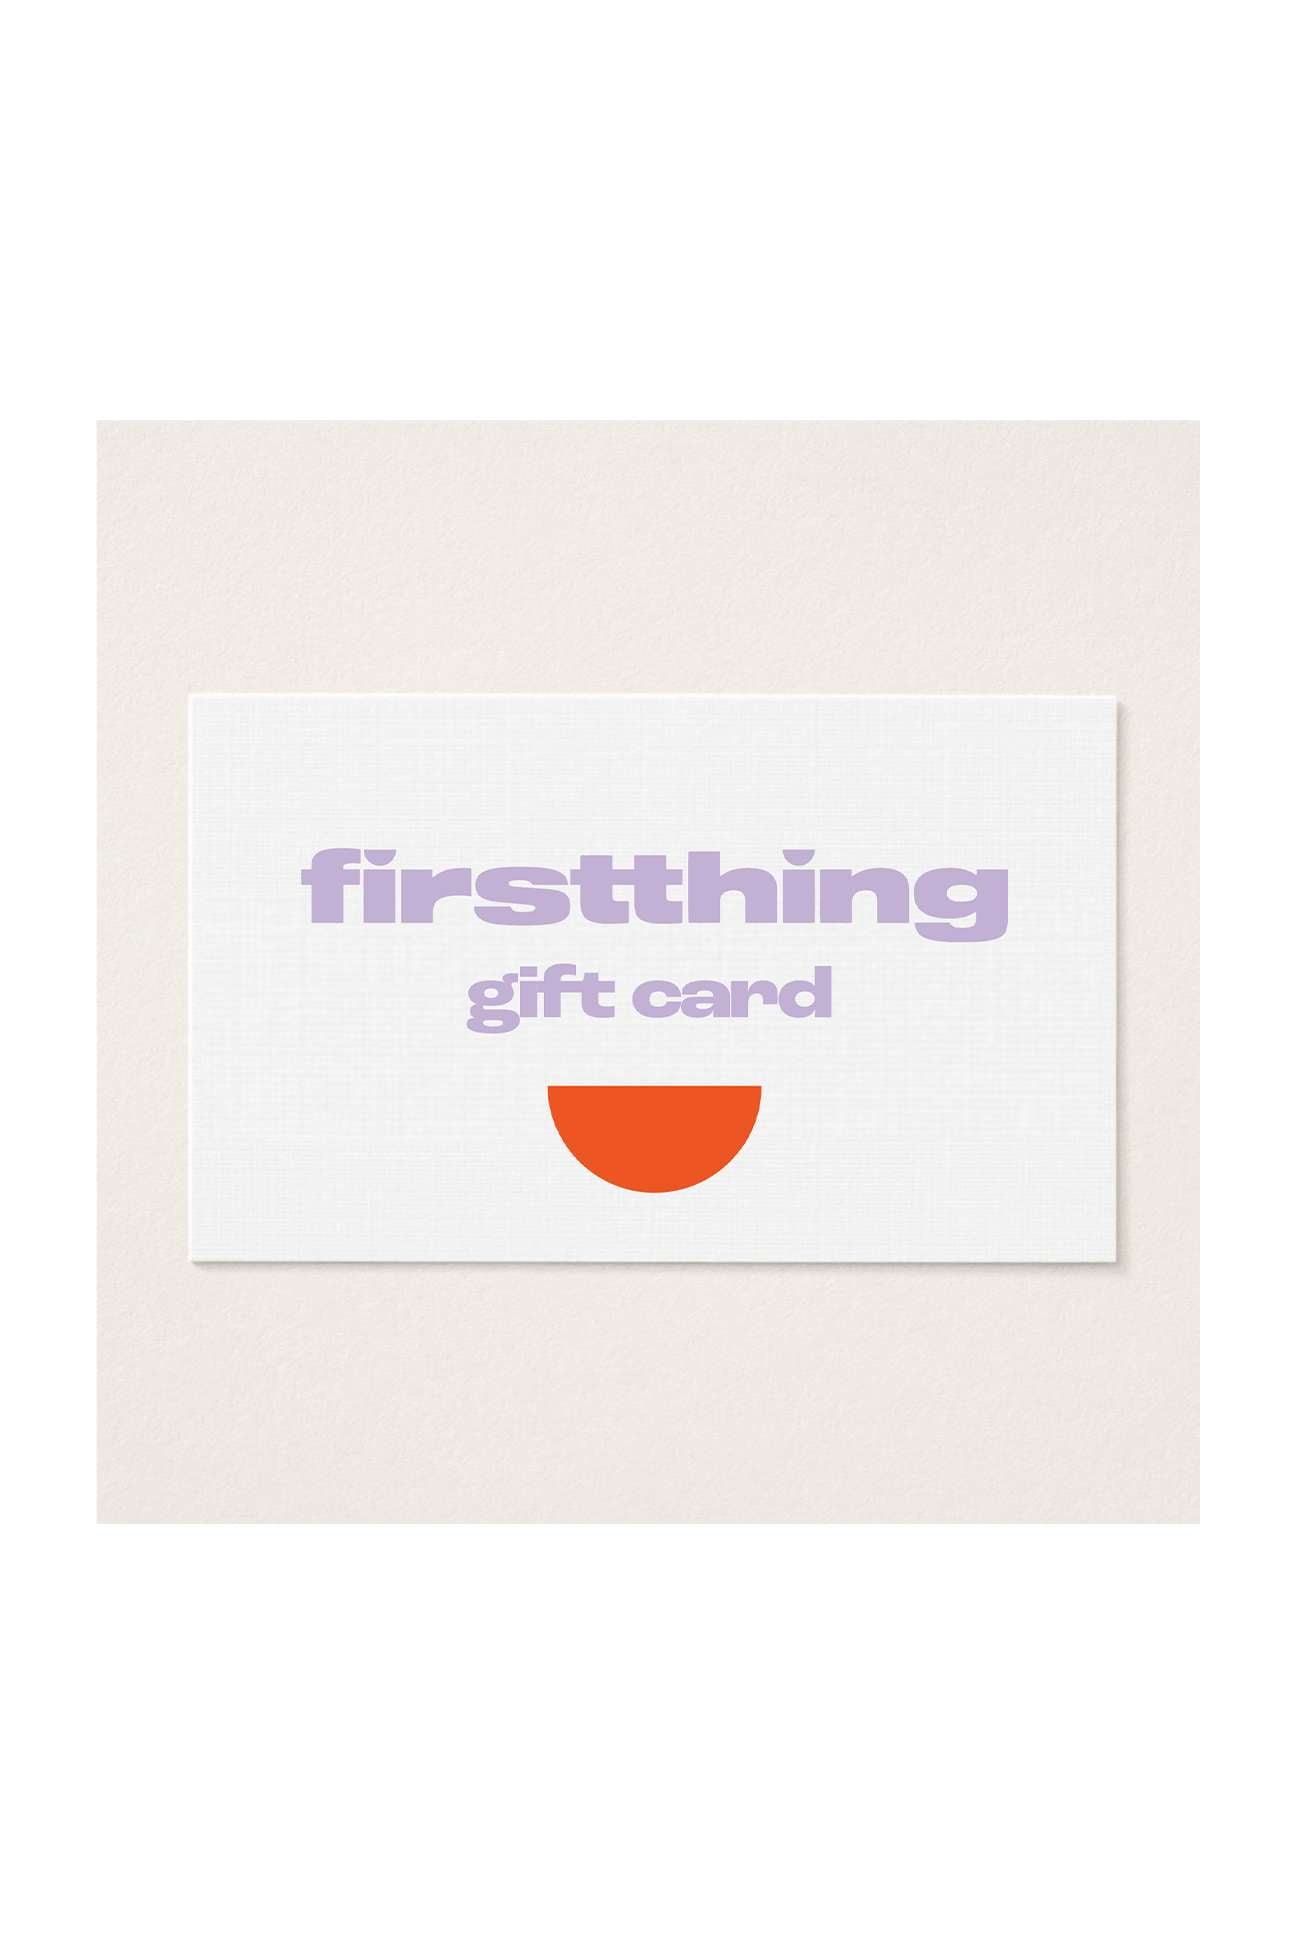 Digital Gift Card, Gift Cards - First Thing Underwear